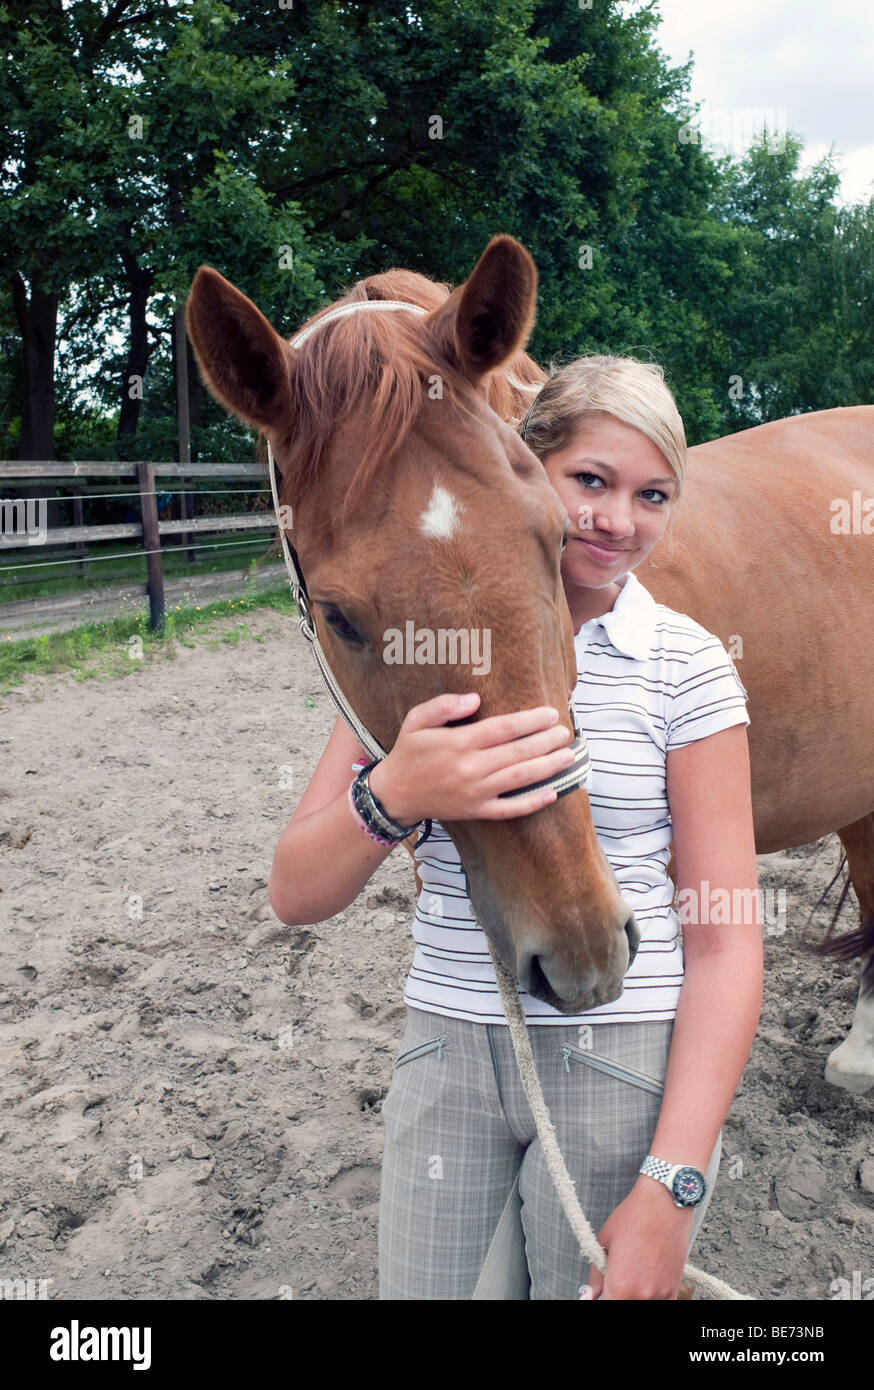 Teenage girl with a horse Stock Photo